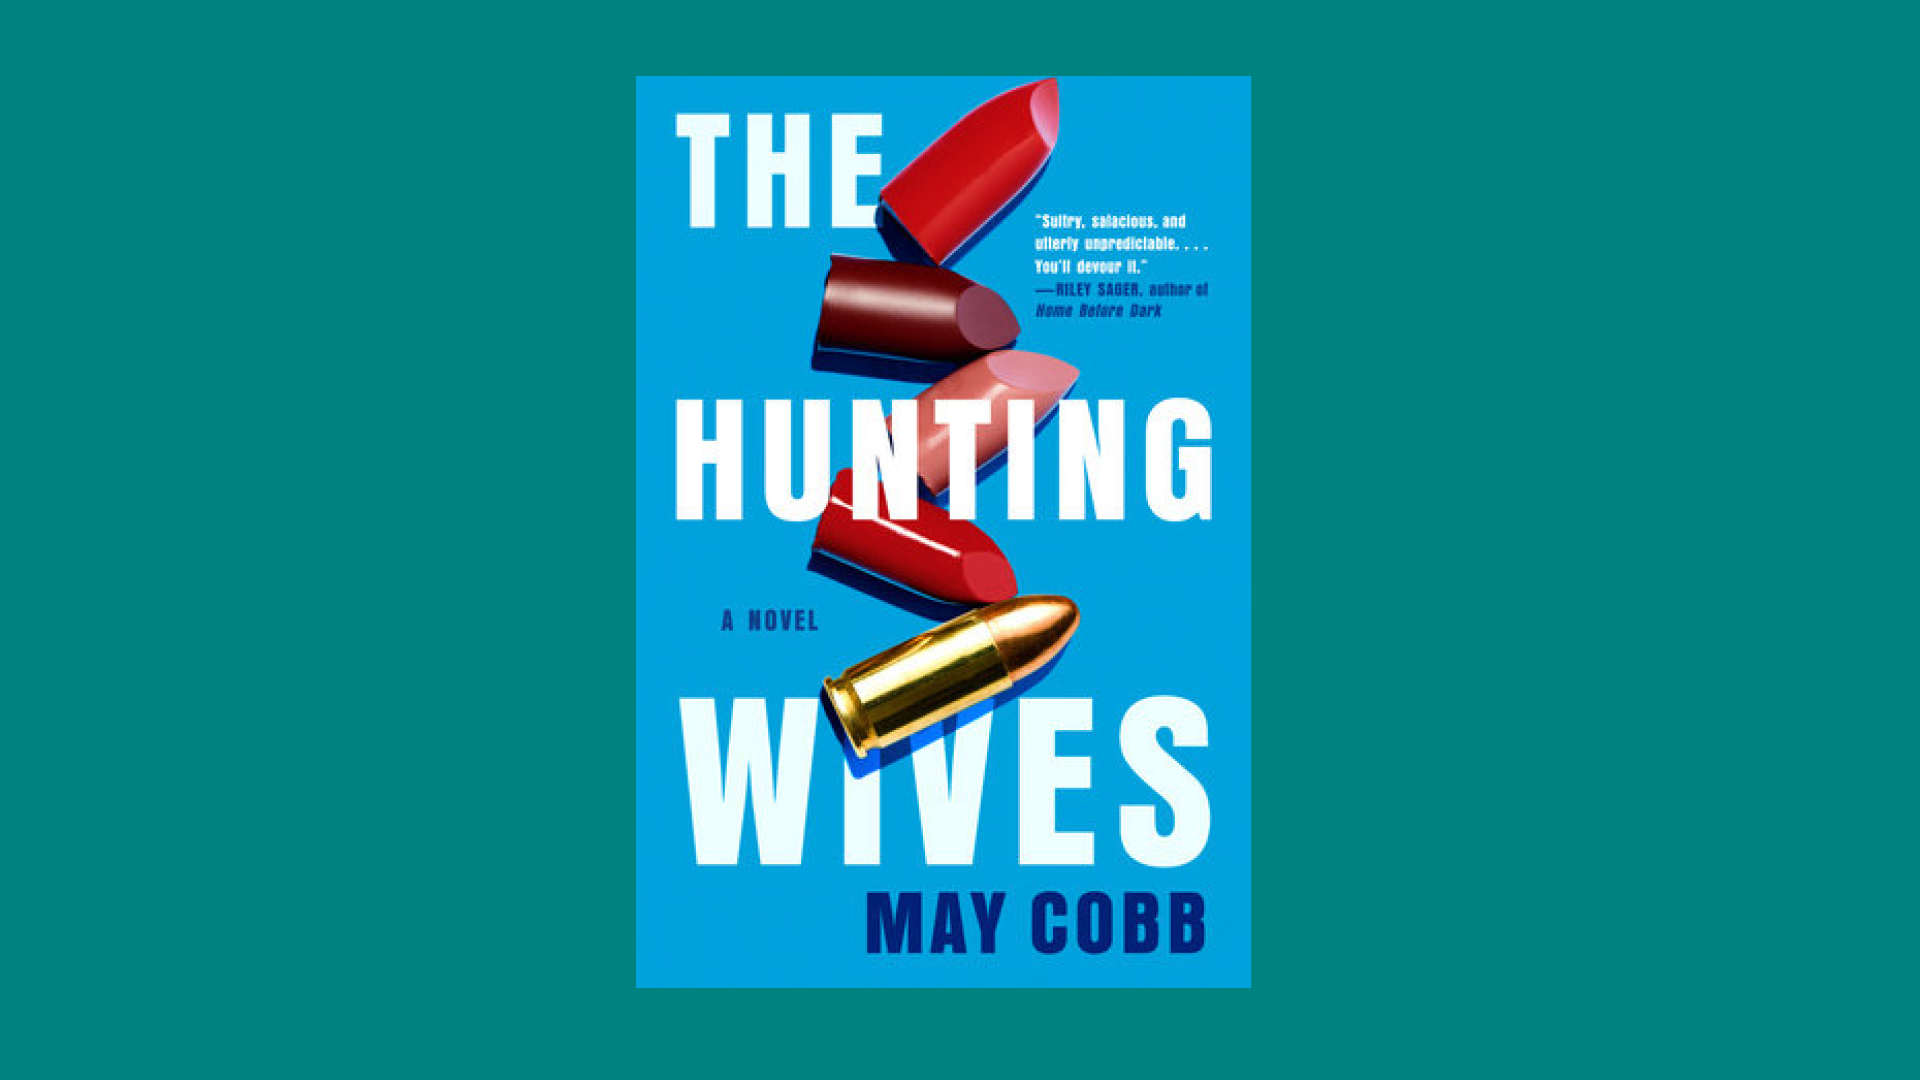 “The Hunting Wives” by May Cobb